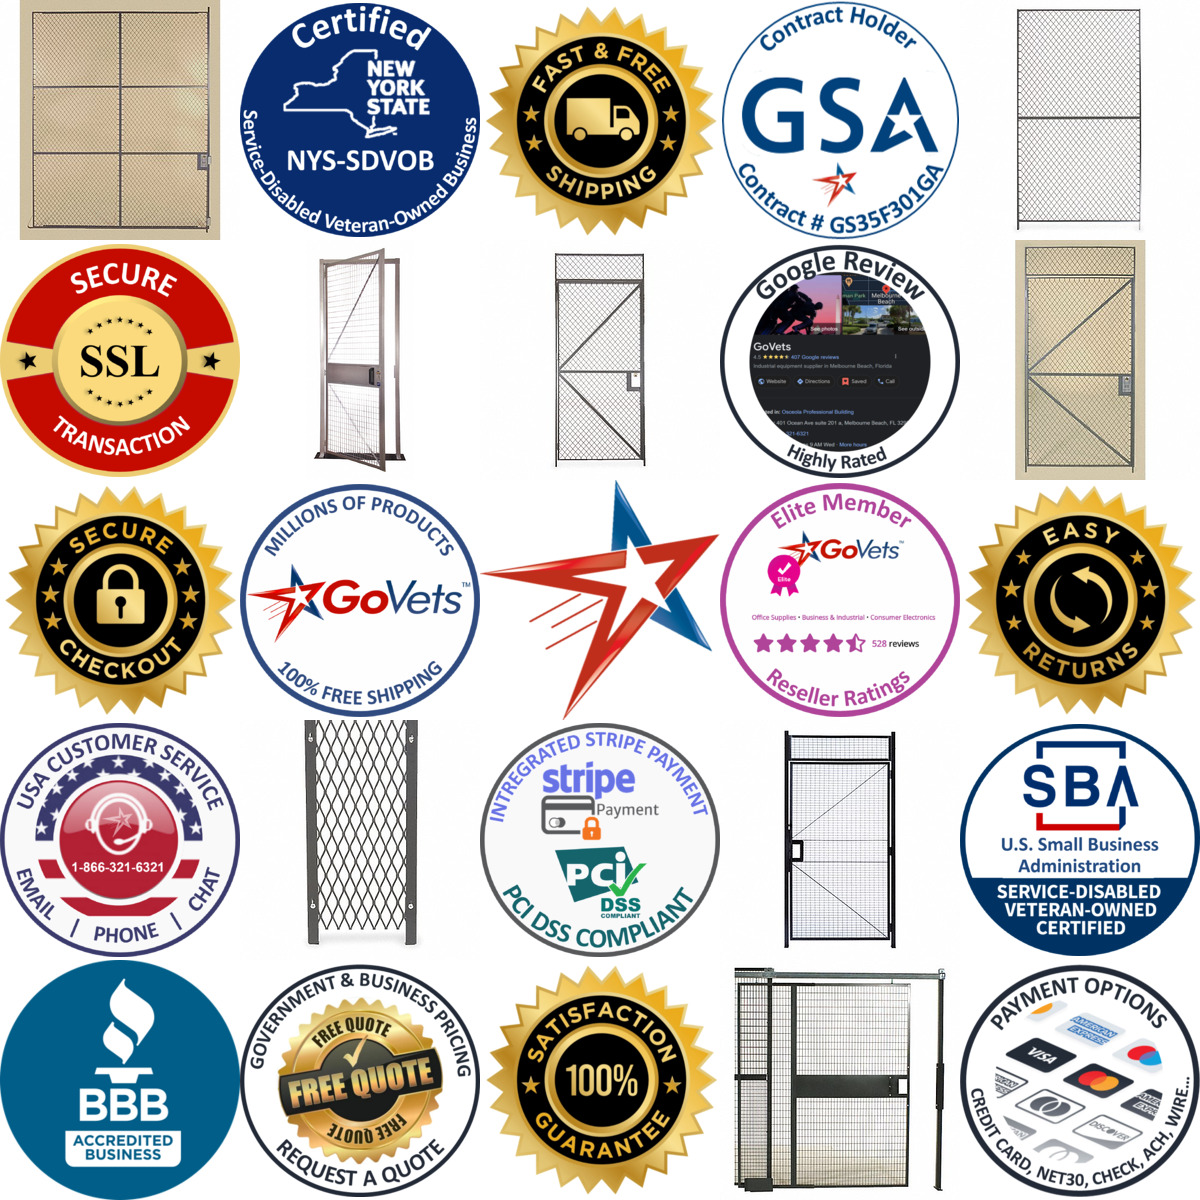 A selection of Wire Security Cage Doors and Gates products on GoVets